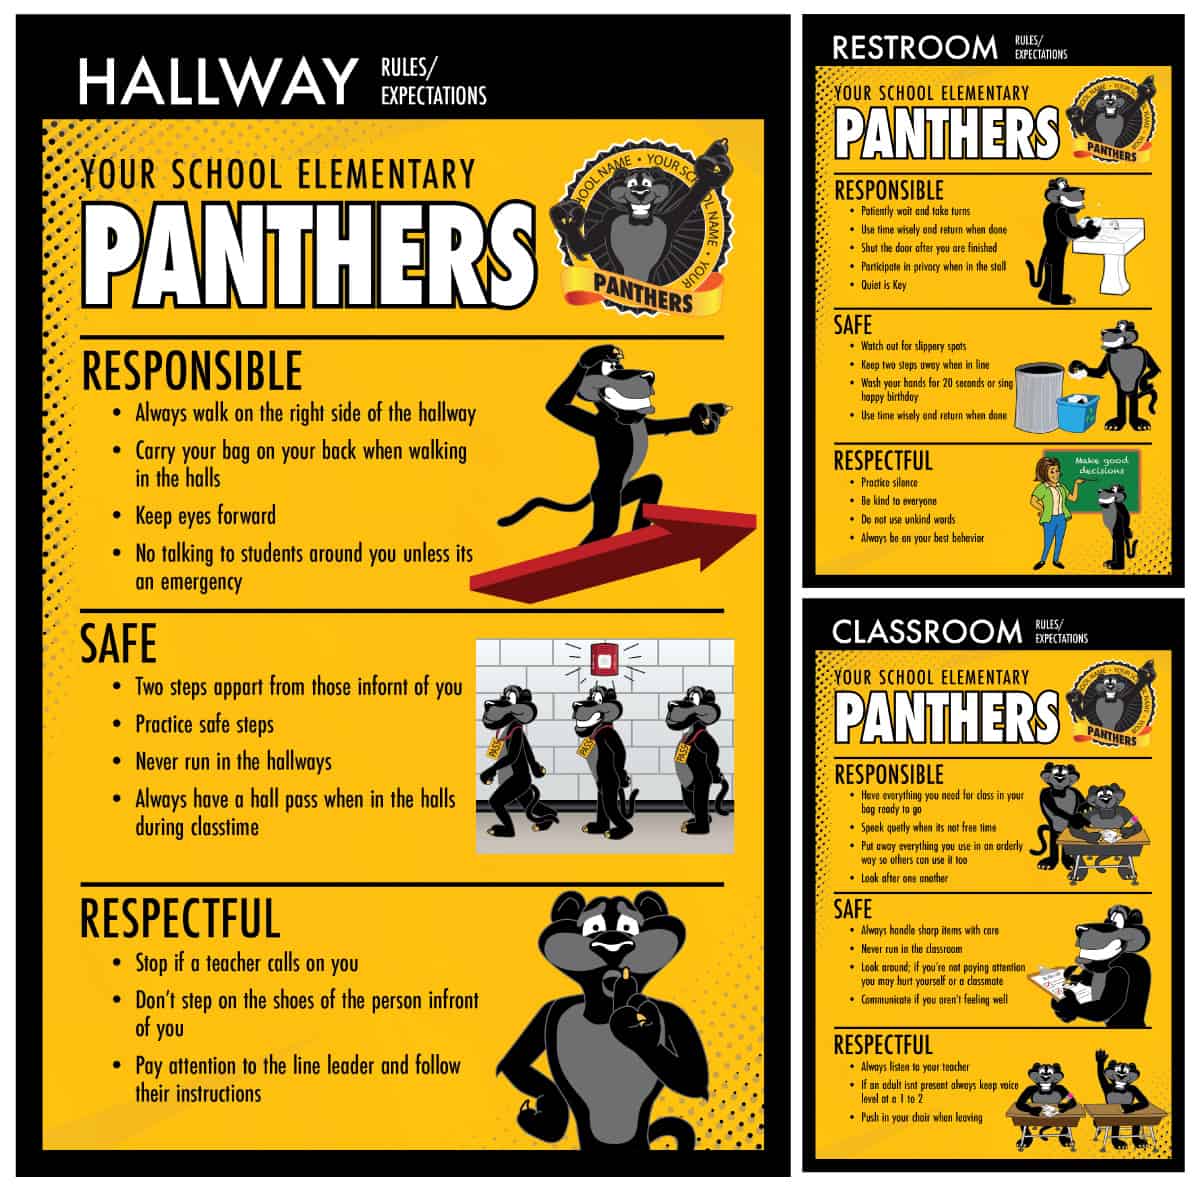 Rules-posters_Panther